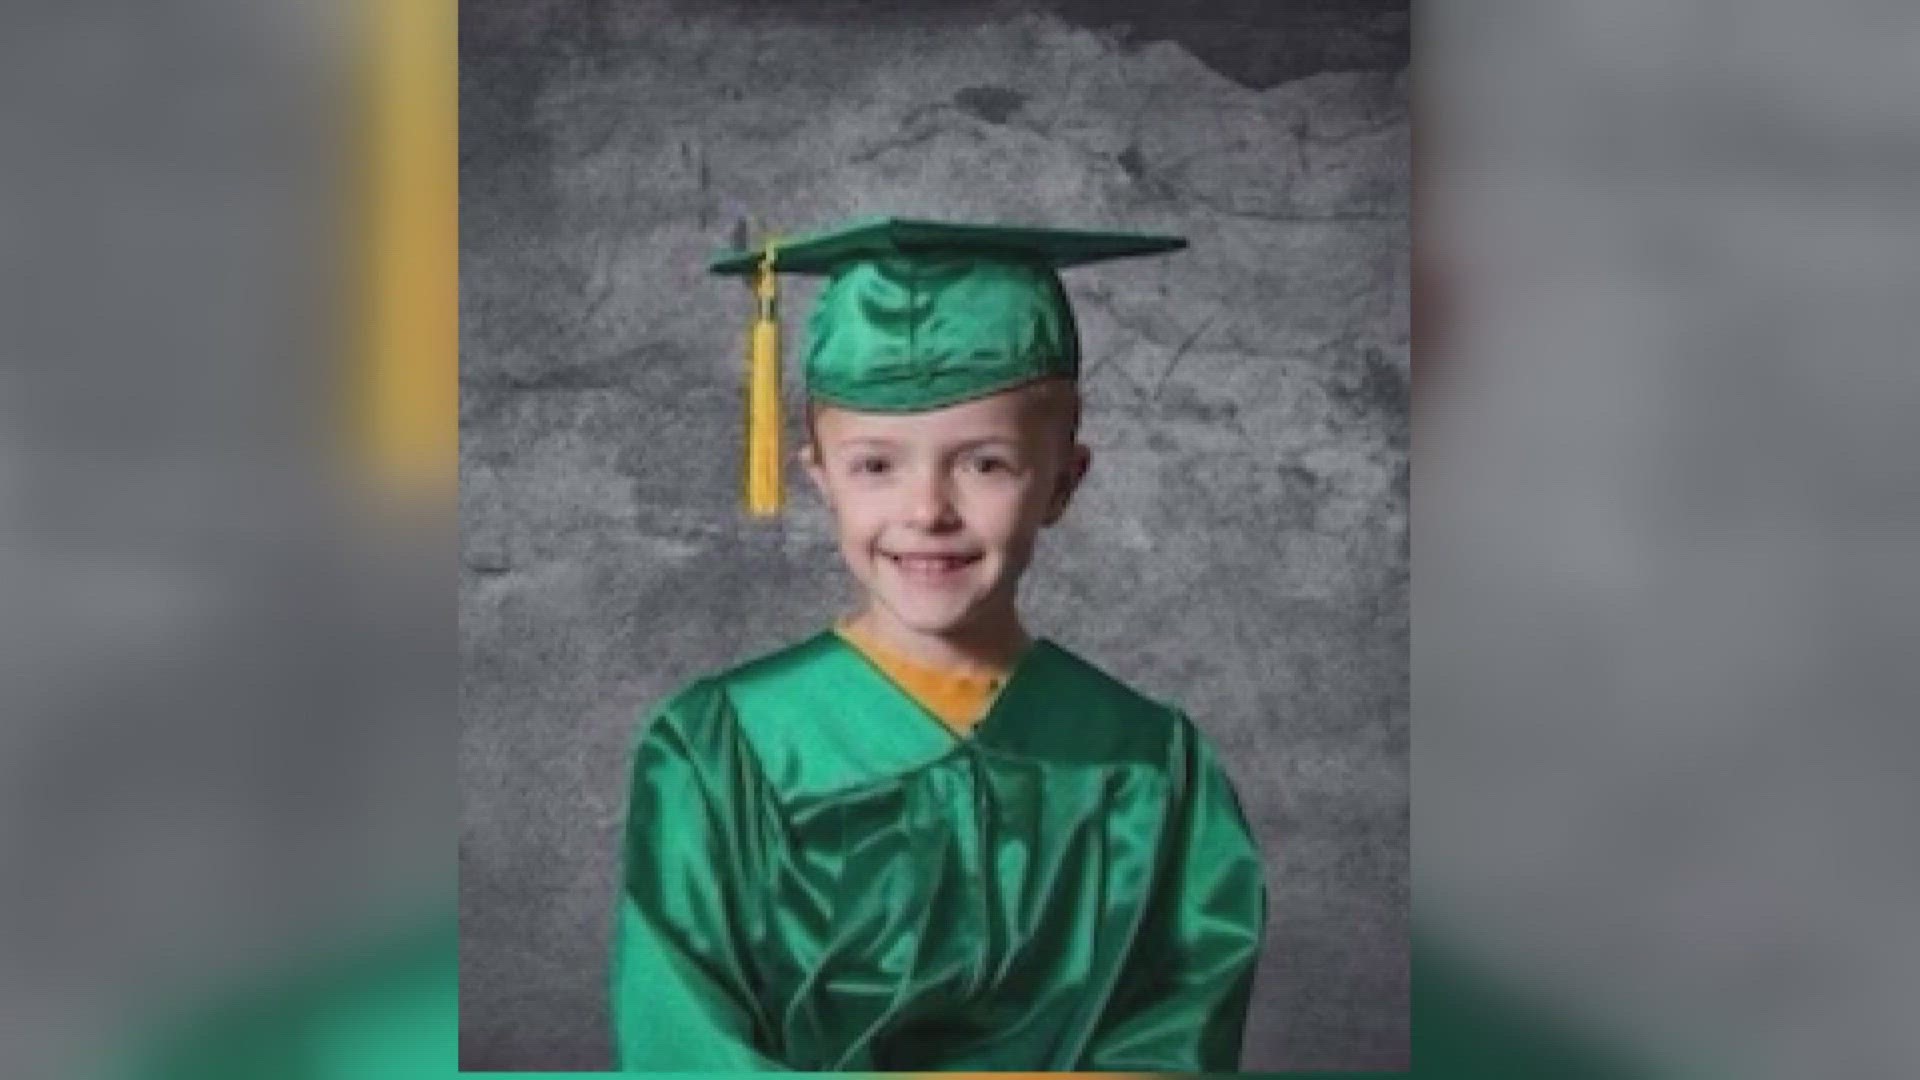 Grayson Boggs death comes a month after his father, Matthew Boggs, died from the same lightning strike in Valley Mills on May 15 around 5 p.m.